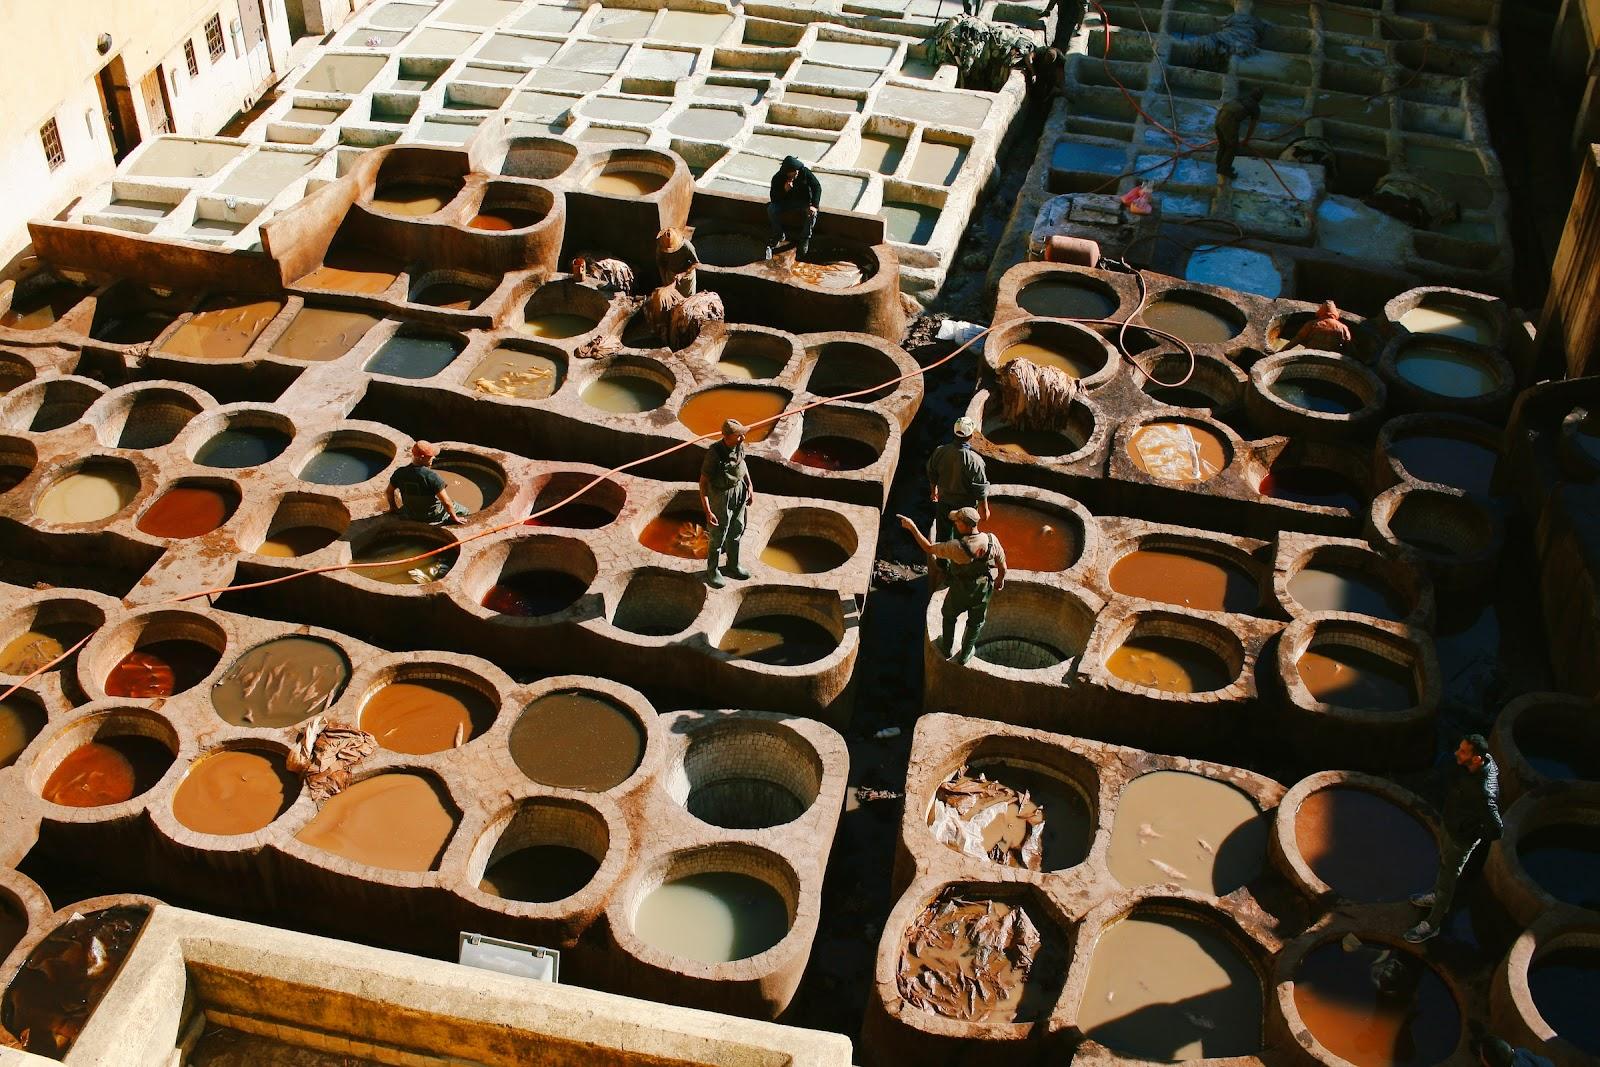 Workers dyeing leather in The Chouara Tannery.